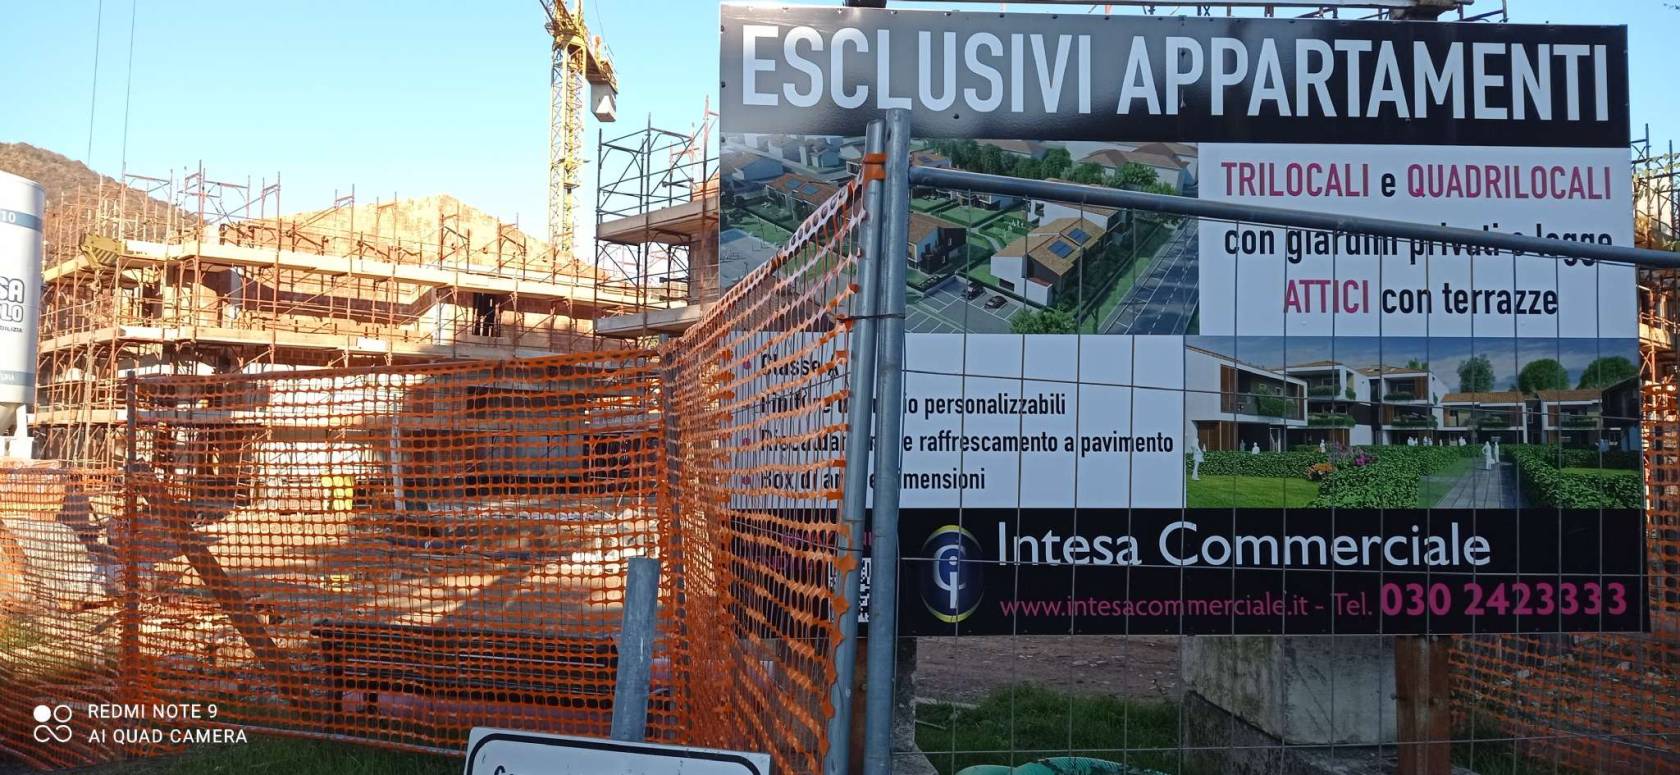 cartello in cantiere